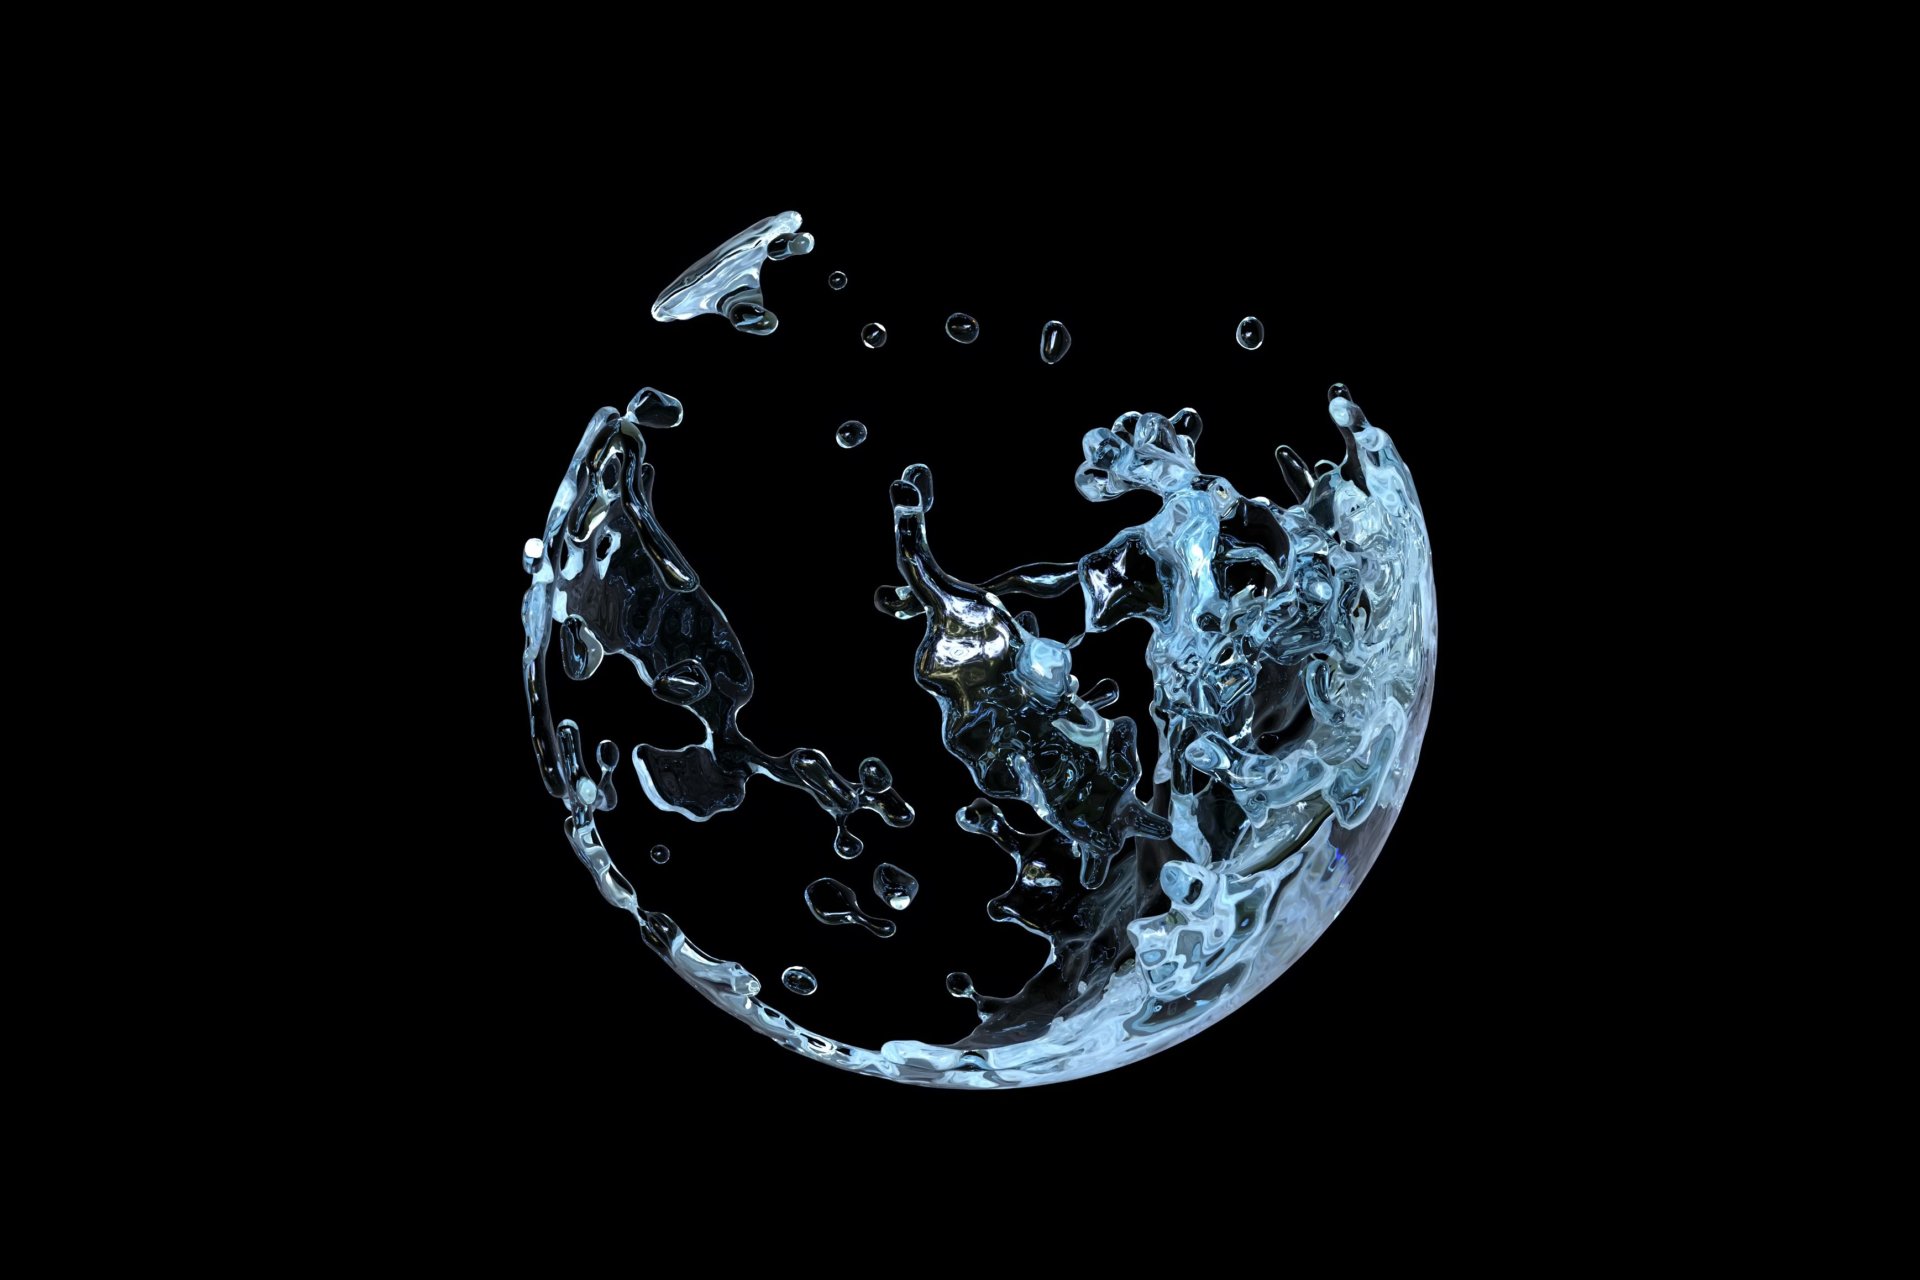 Storm inside a ball of water. A droplet of water shaped like a globe against a black background